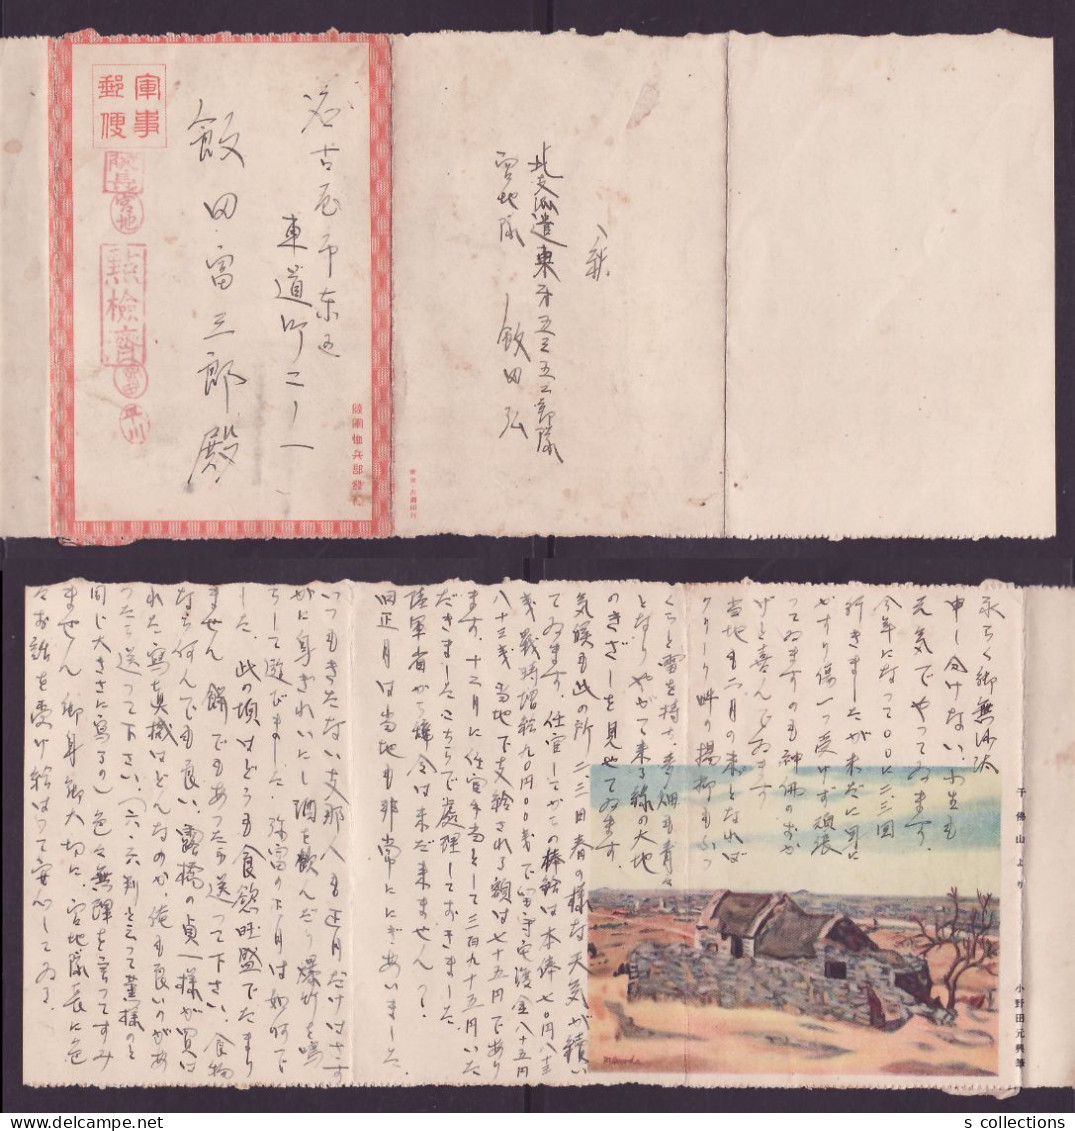 JAPAN WWII Military Mt. Thousand Buddha Picture Letter Sheet North China WW2 35th Division Cavalry 25th Regiment - 1941-45 Cina Del Nord